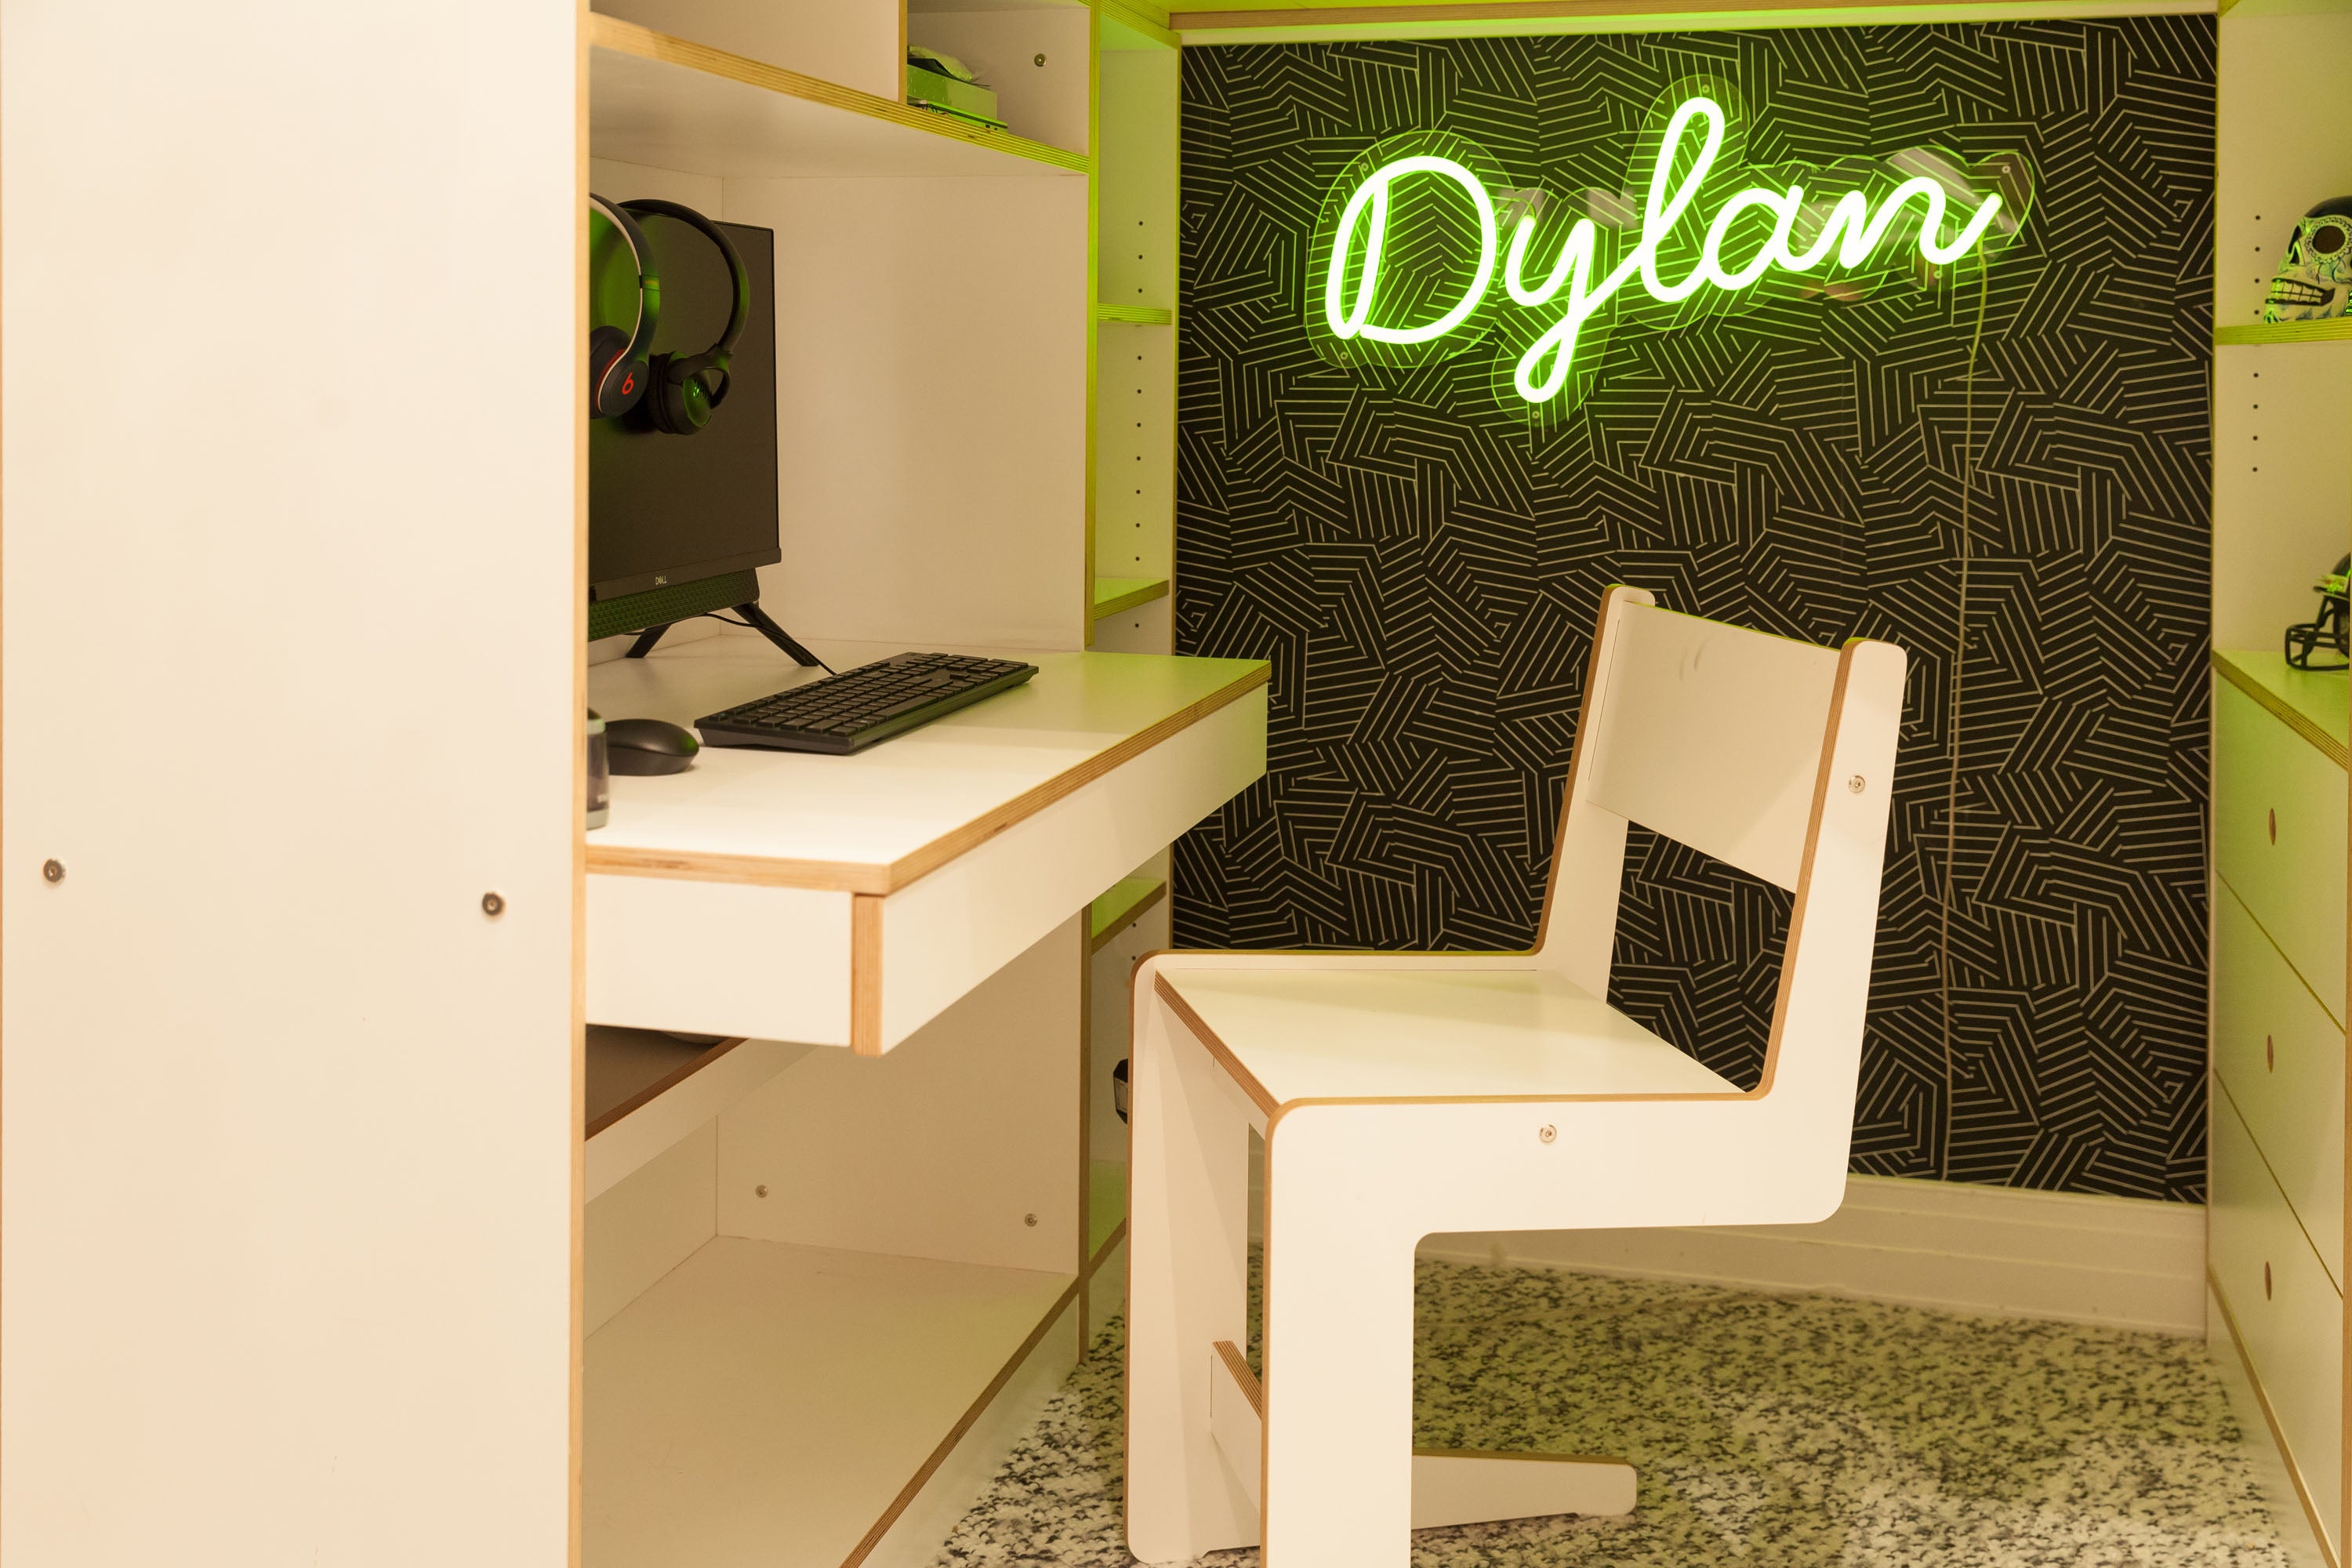 Modern desk, computer, ‘Dylan’ neon sign, patterned wall, white chair.